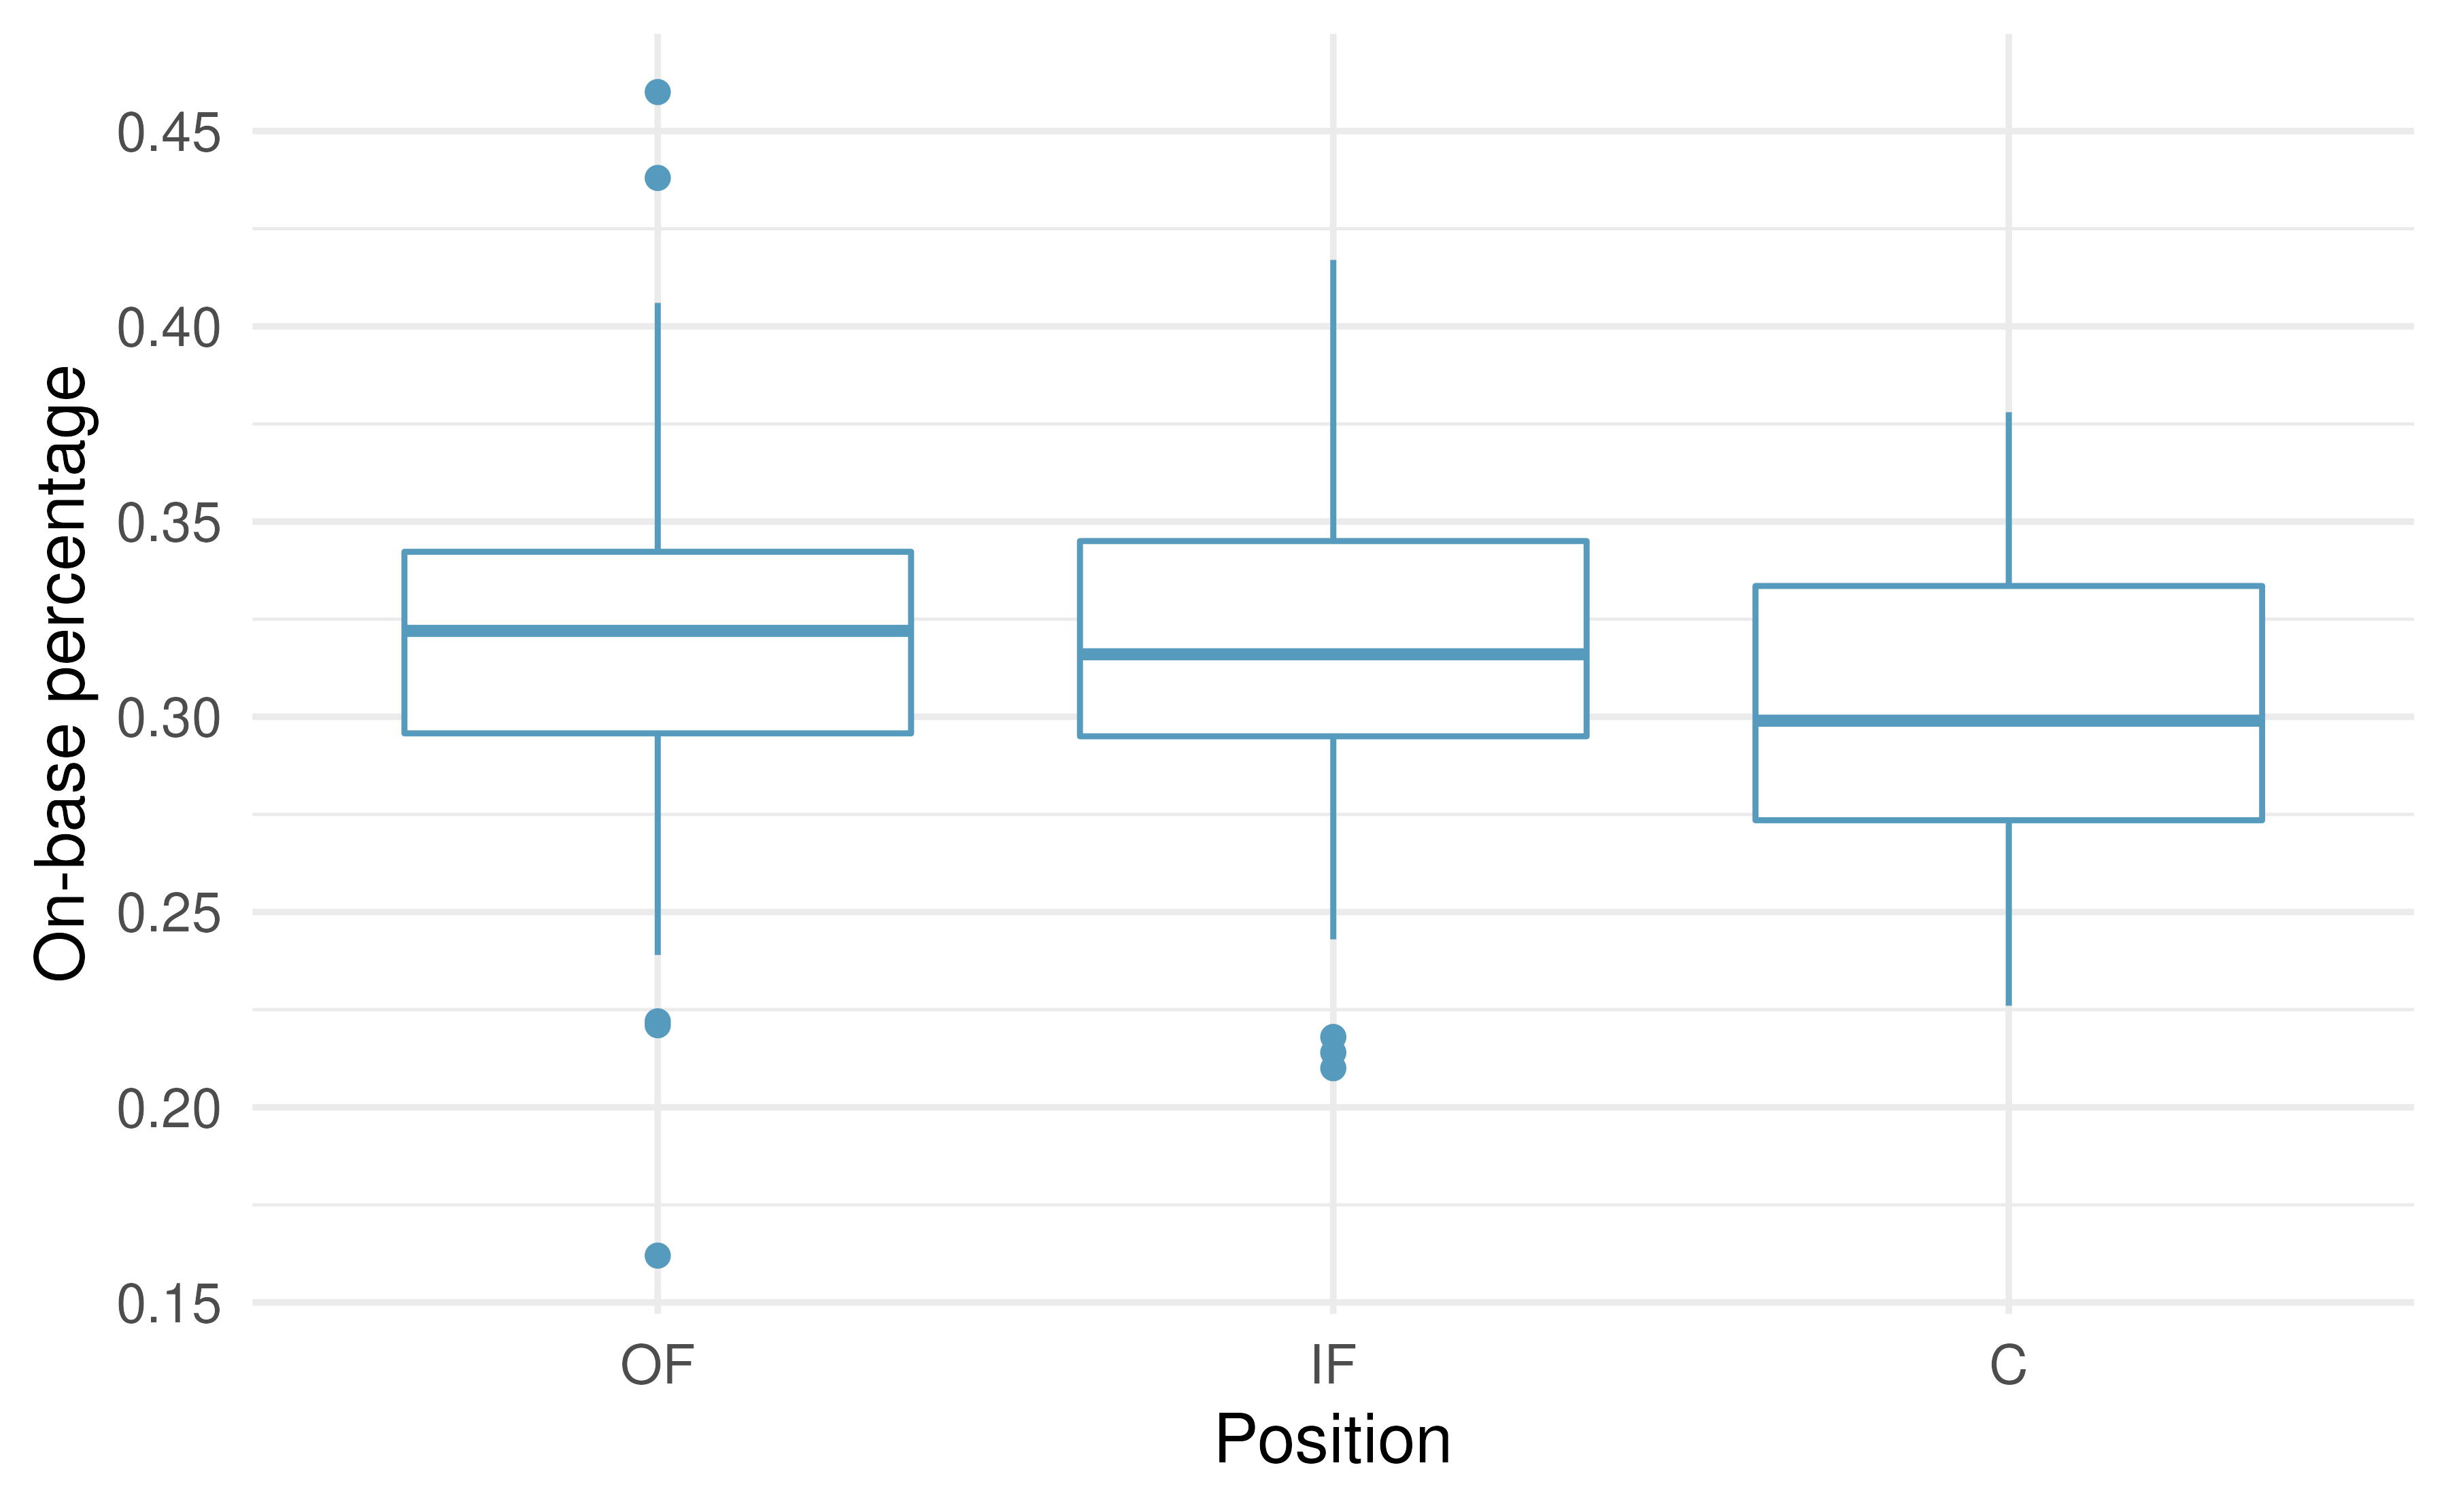 Side-by-side box plot of the on-base percentage for 429 players across three groups. There is one prominent outlier visible in the infield group, but with 205 observations in the infield group, this outlier is not extreme enough to have an impact on the calculations, so it is not a concern for moving forward with the analysis.